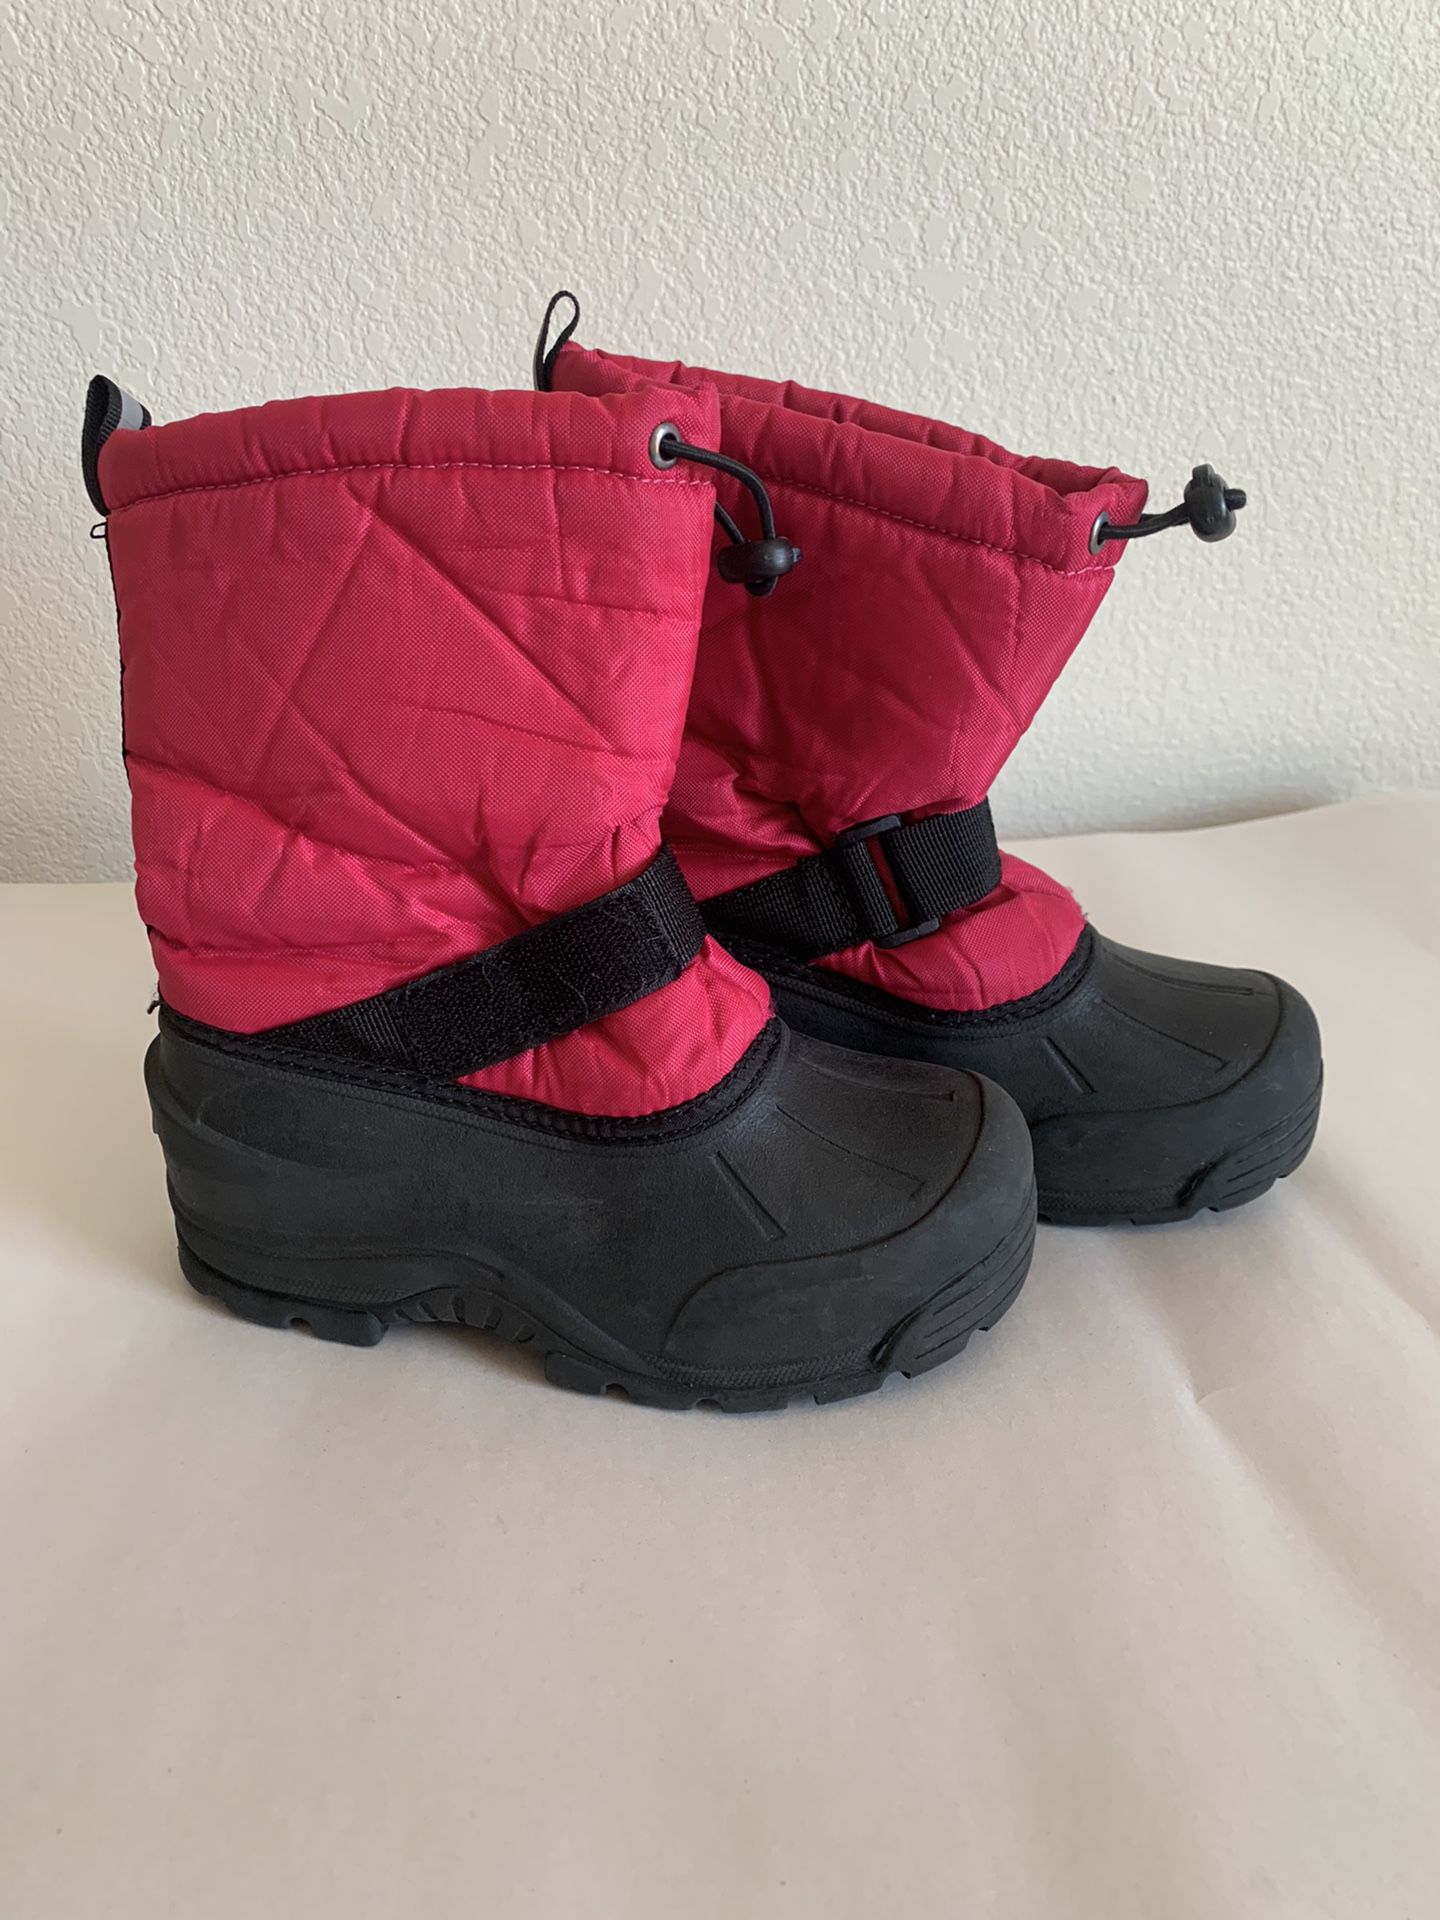 snow boots for girls size 13